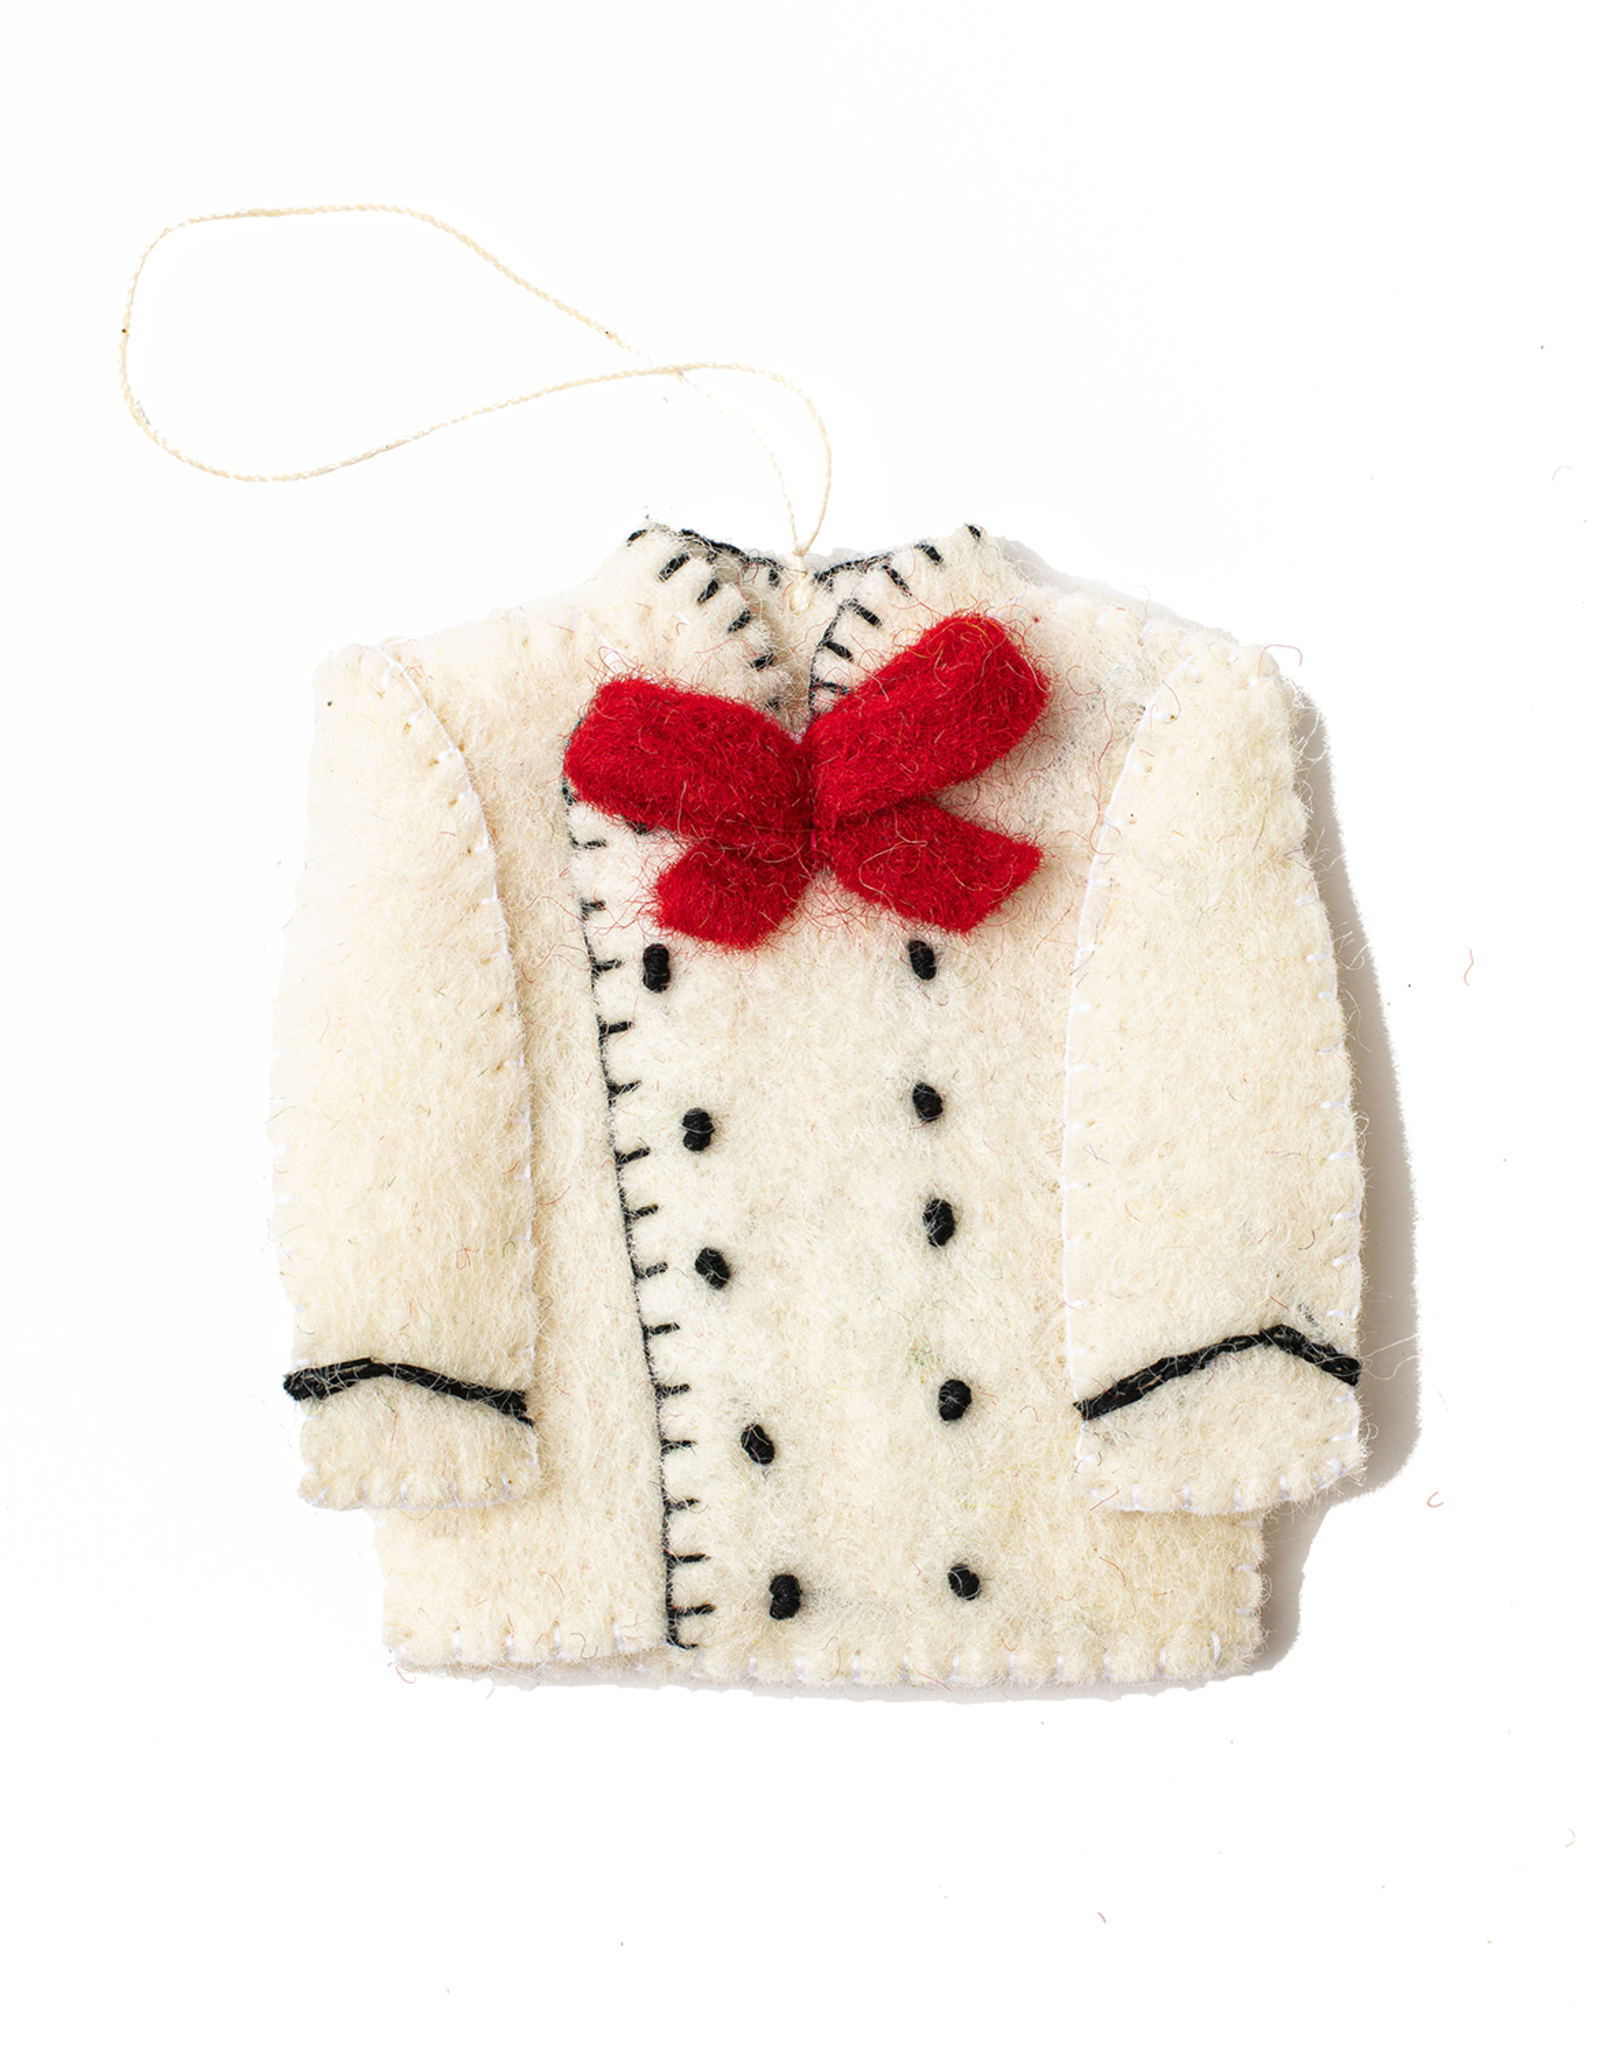 Global Goods Partners Chef's Jacket Felted Ornament